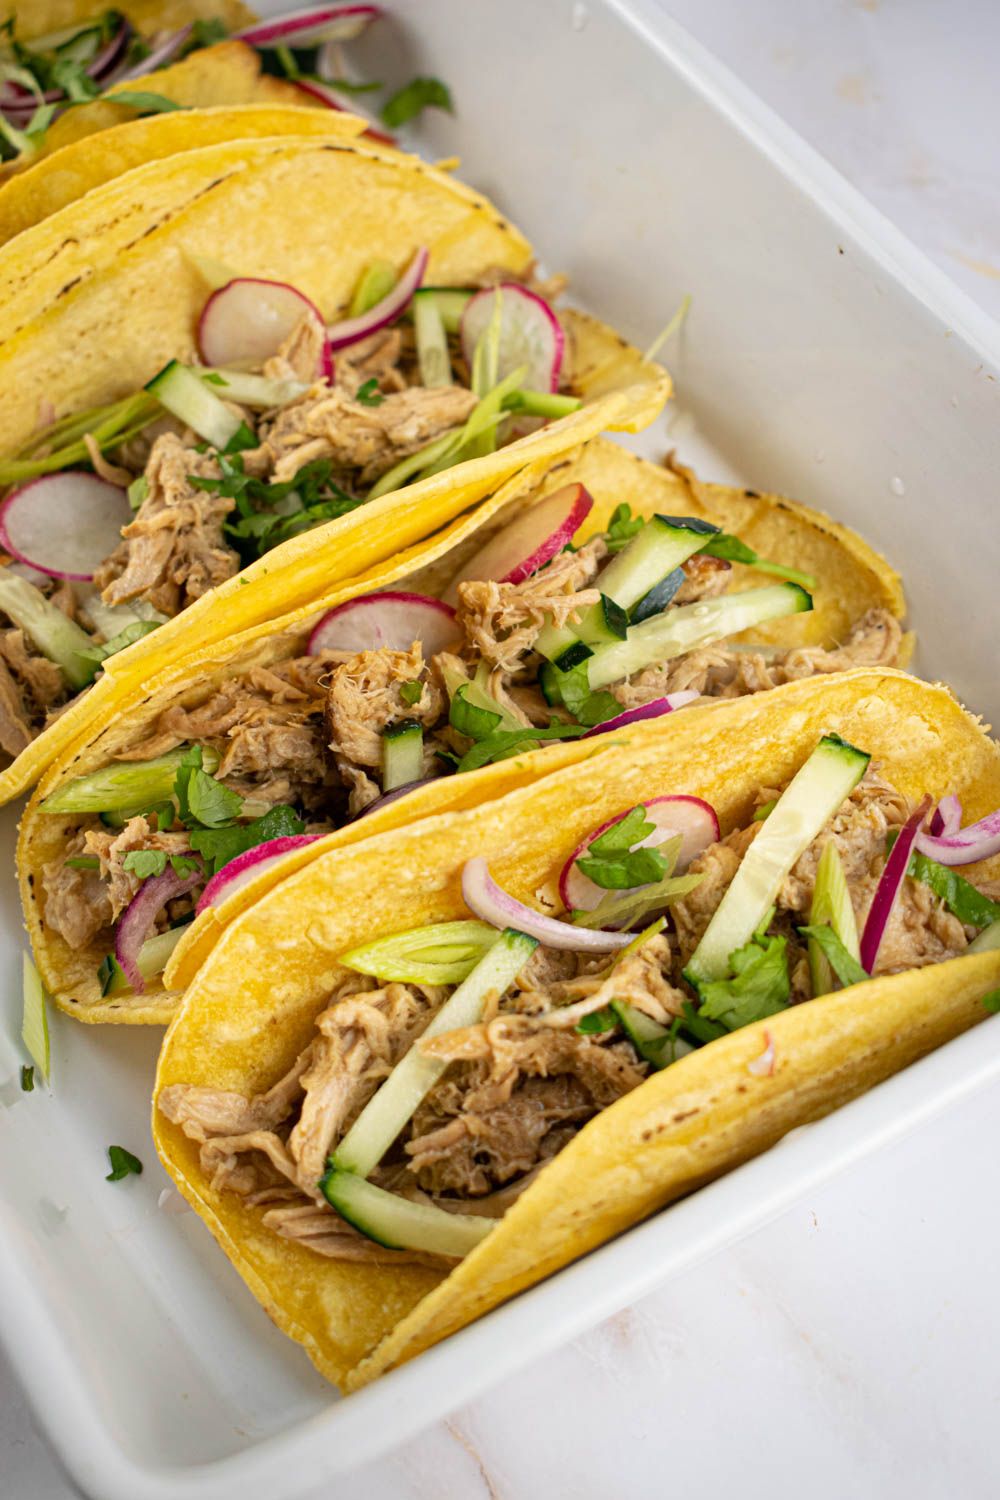 Crockpot pokr banh mi with radishes, cucumbers, and green onions in corn tortillas.